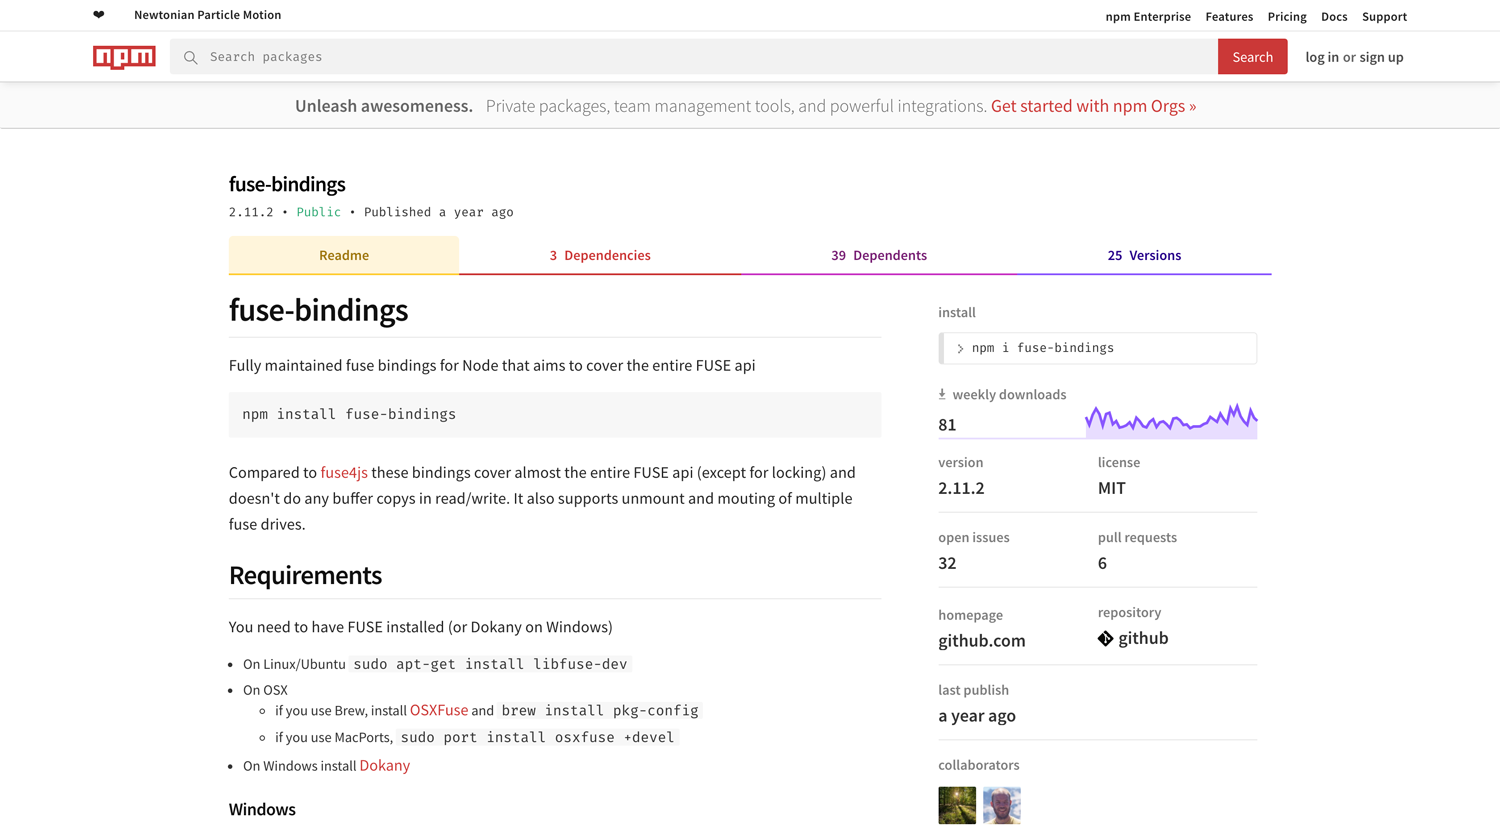 The fuse-bindings npm page